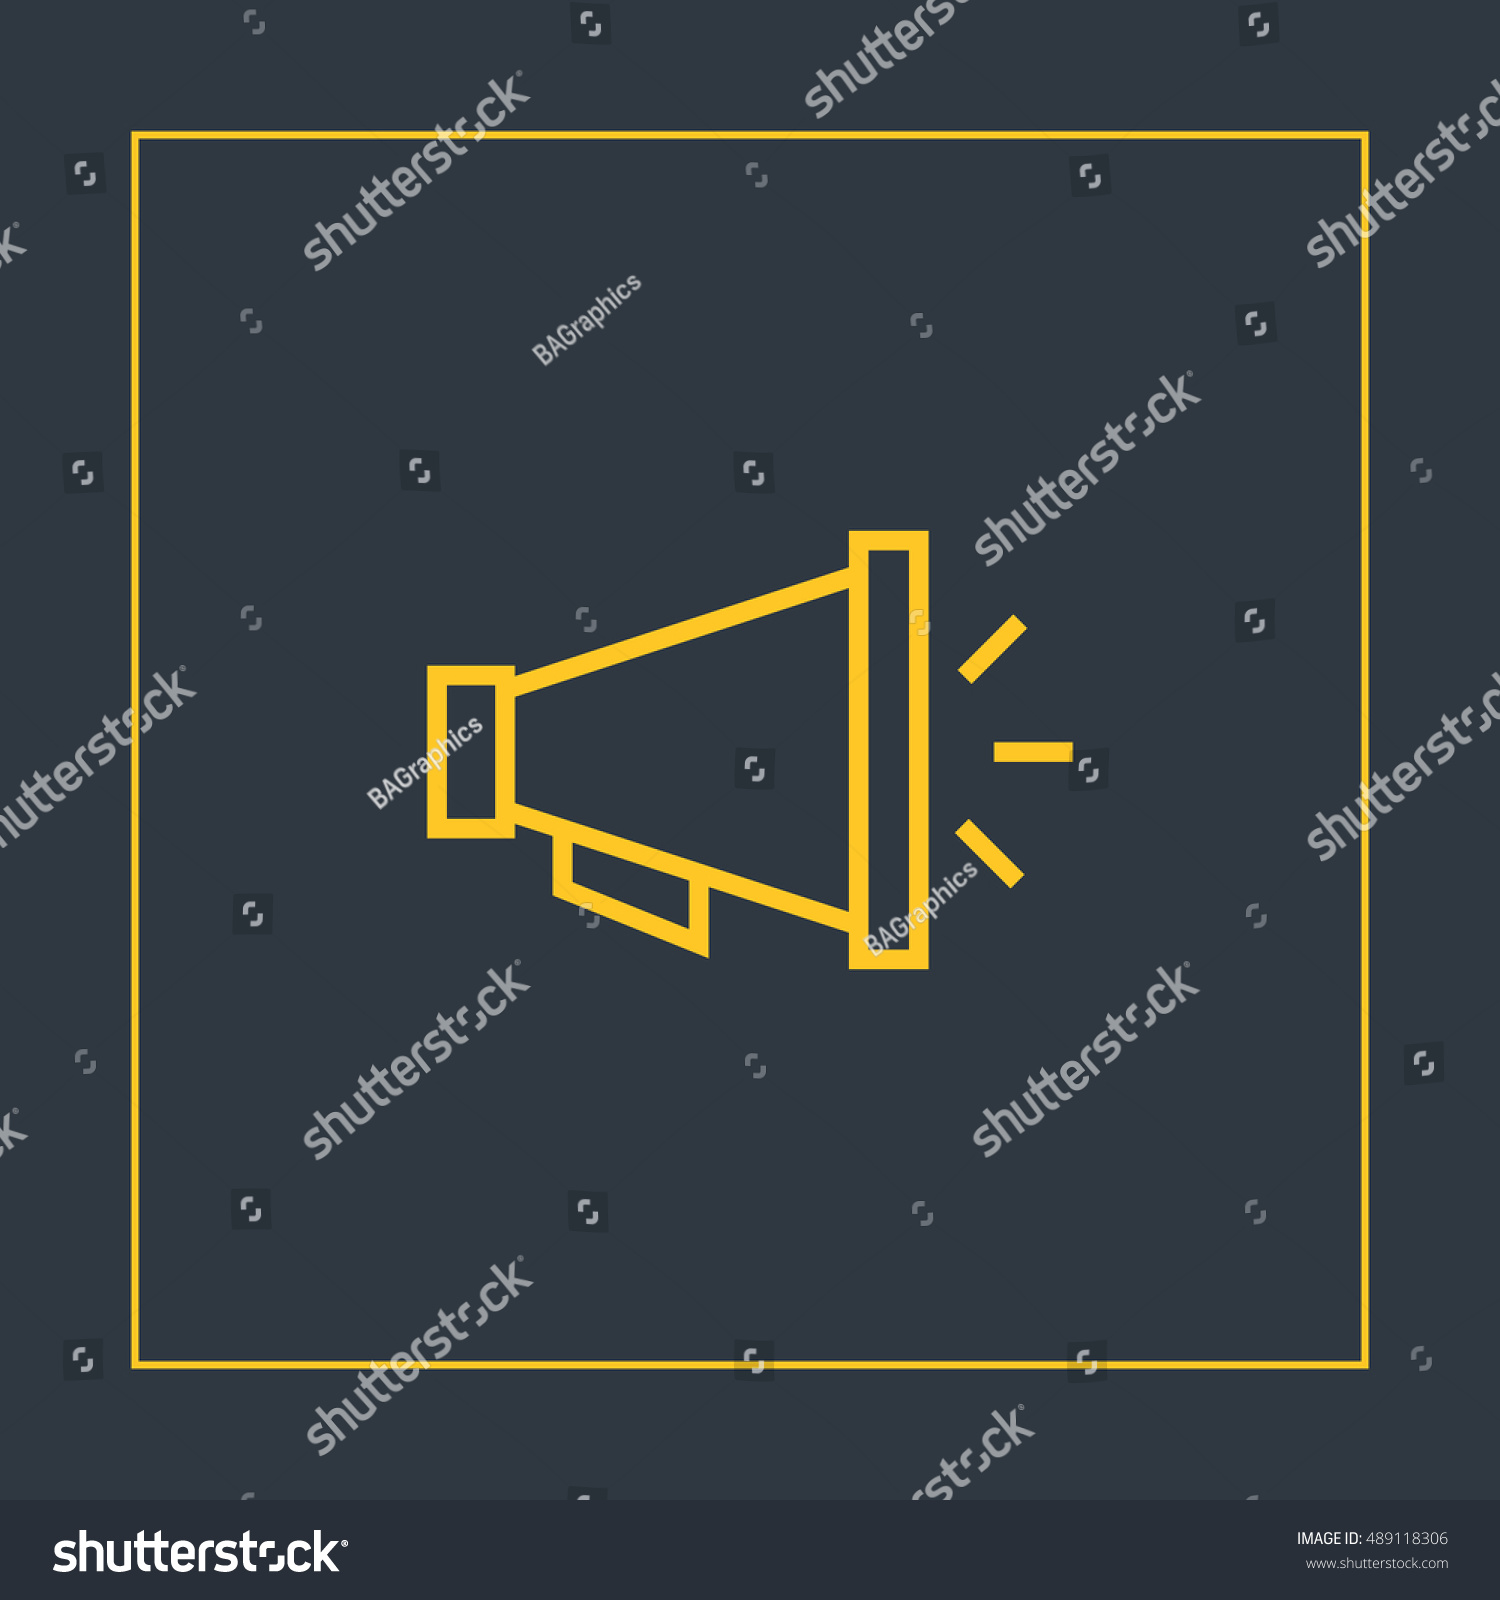 SVG of Loudspeaker icon vector, clip art. Also useful as logo, web element, symbol, graphic image, silhouette and illustration. Compatible with ai, cdr, jpg, png, svg, pdf, ico and eps. svg